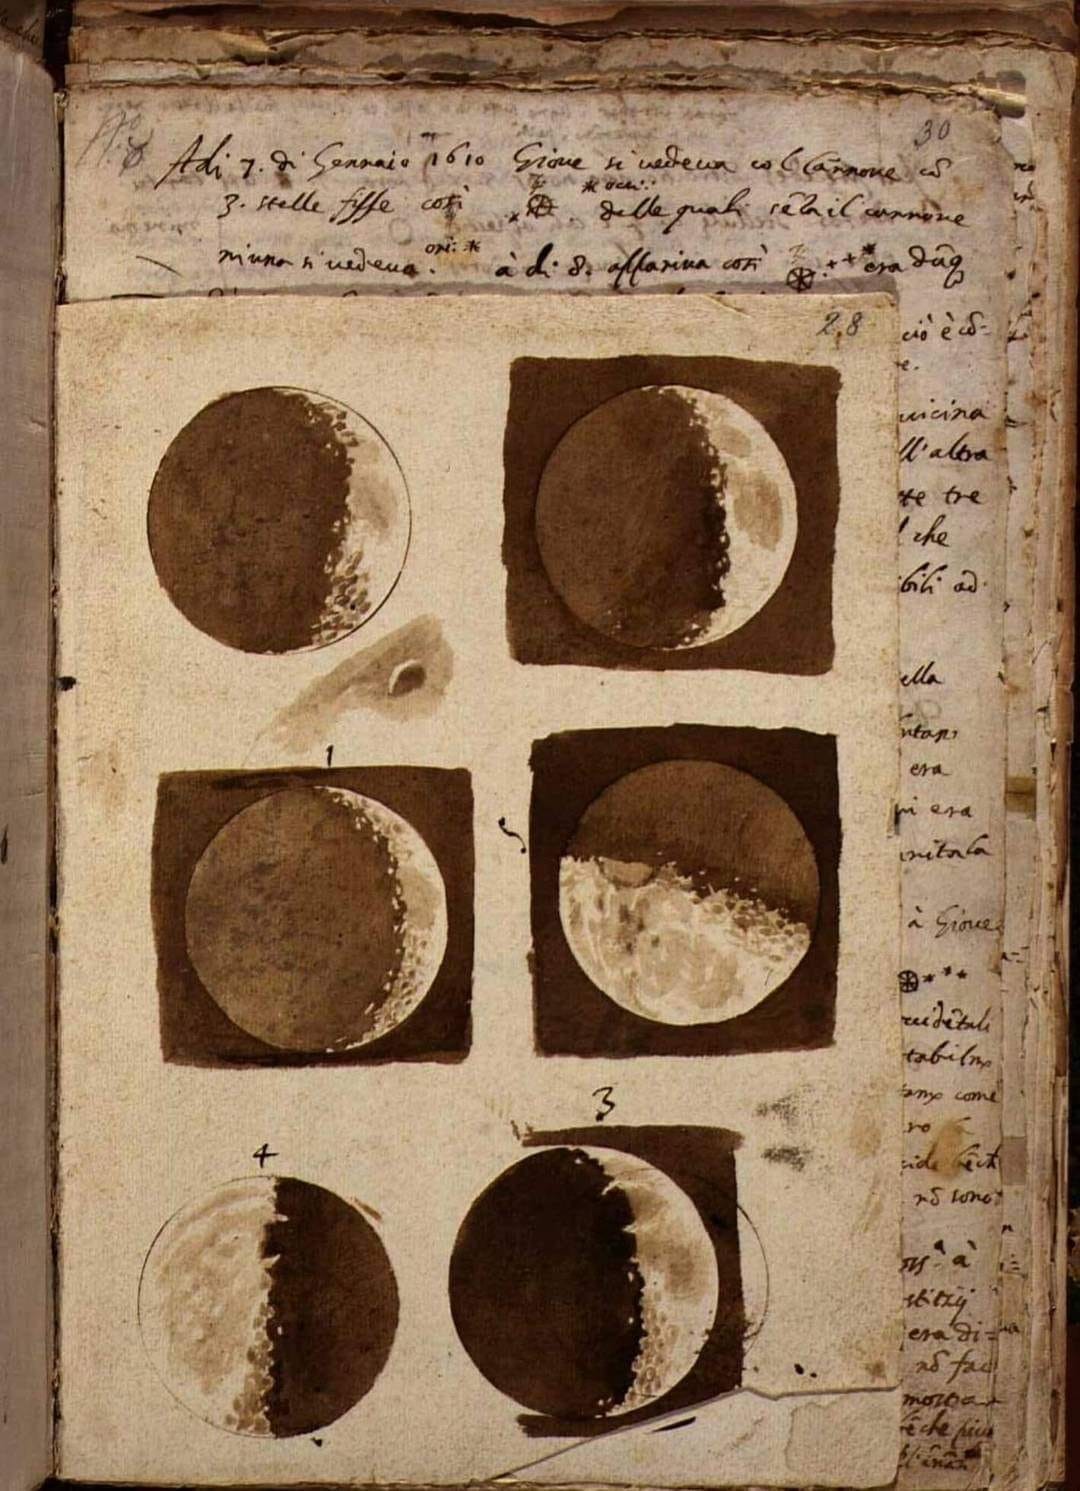 First-ever drawings of the moon were made by Galileo Galeili after observing it through his telescope in 1609.